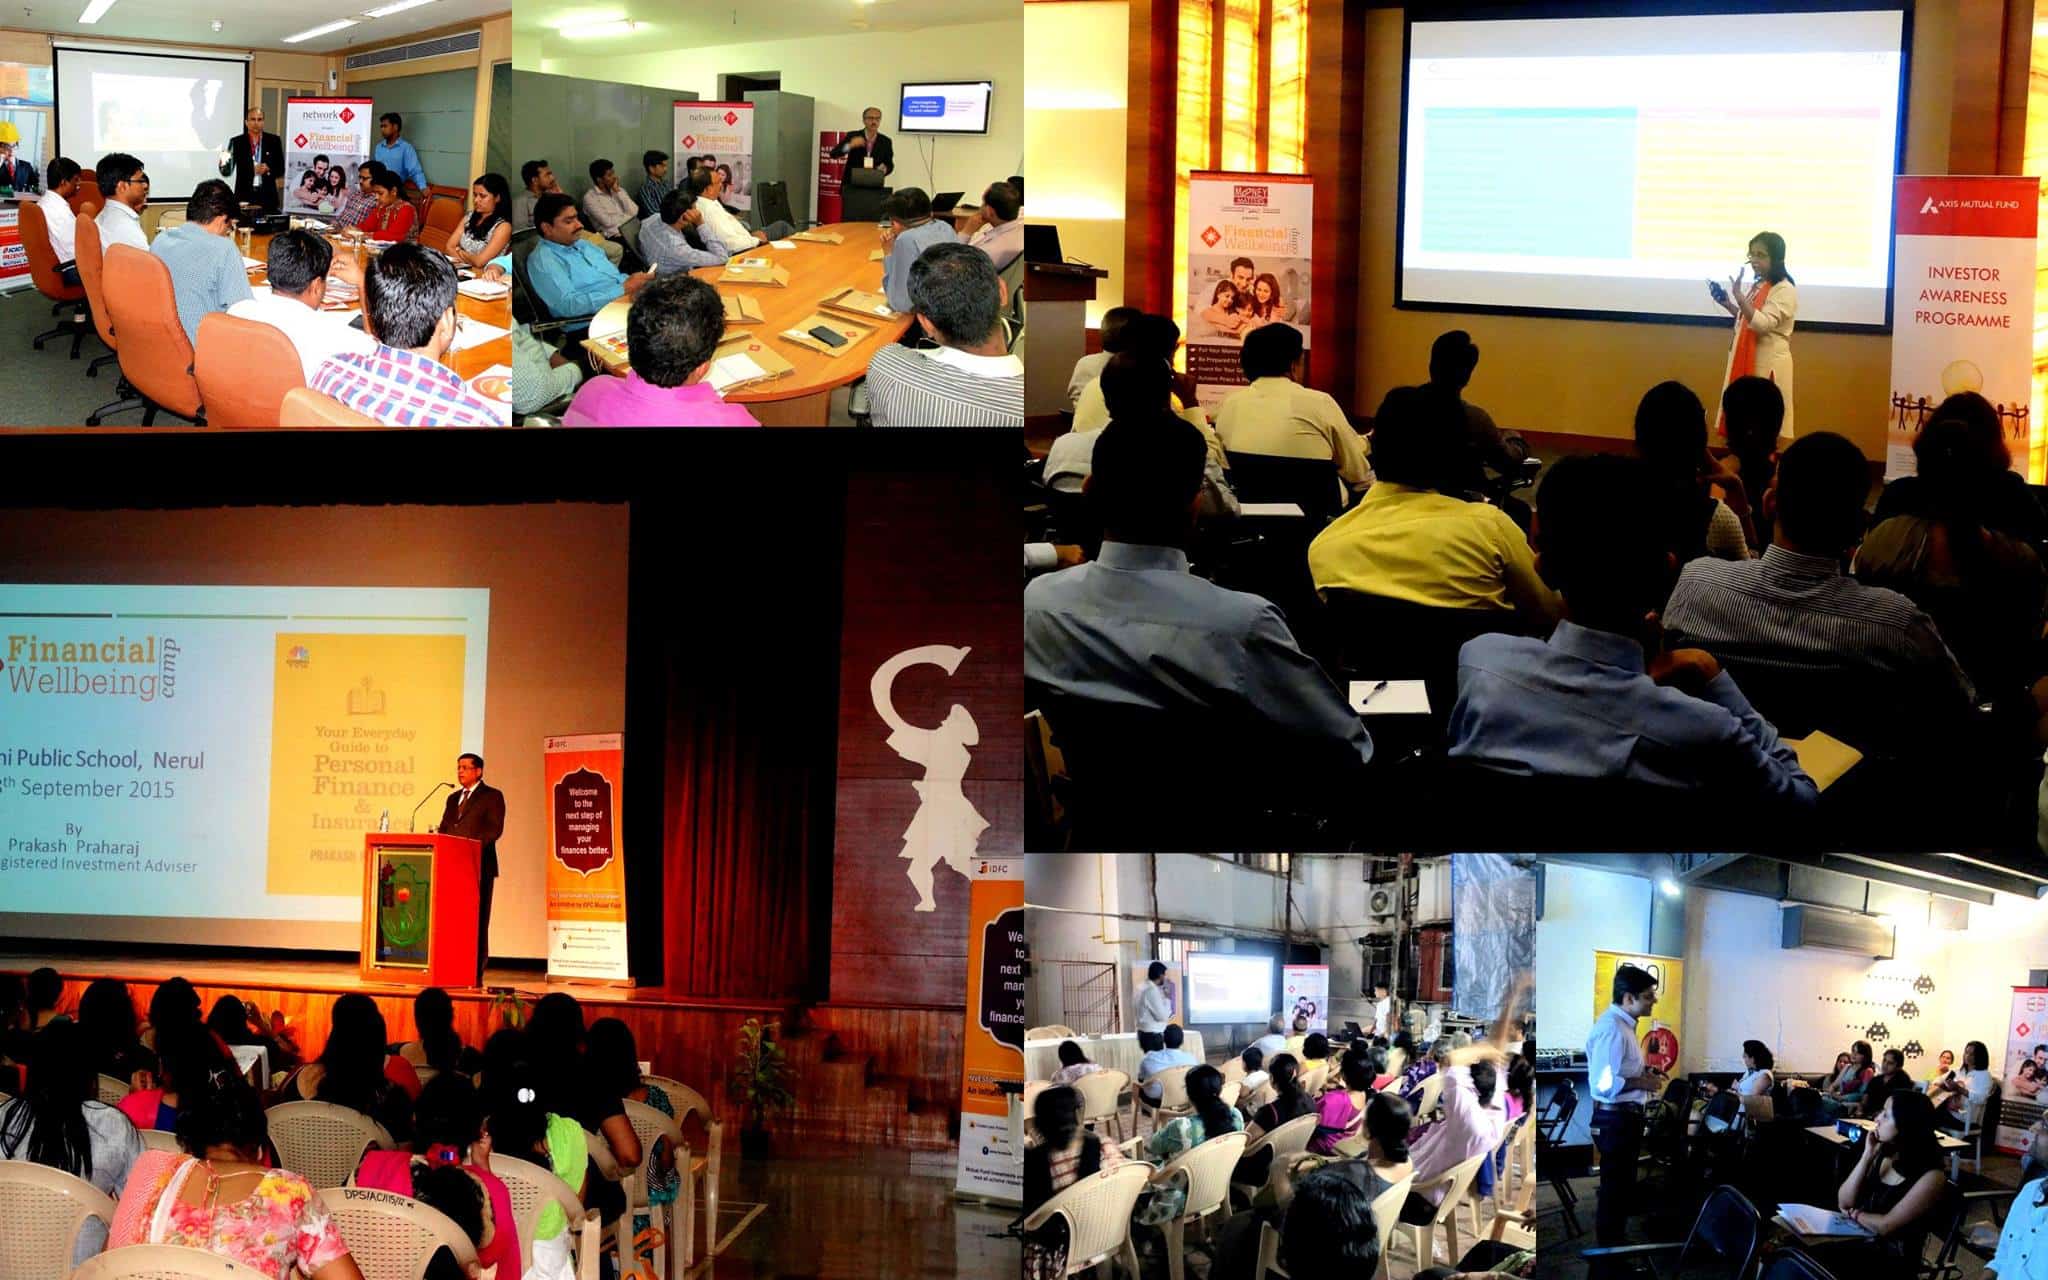 Investor Awareness Programs by NFP Promembers Across India